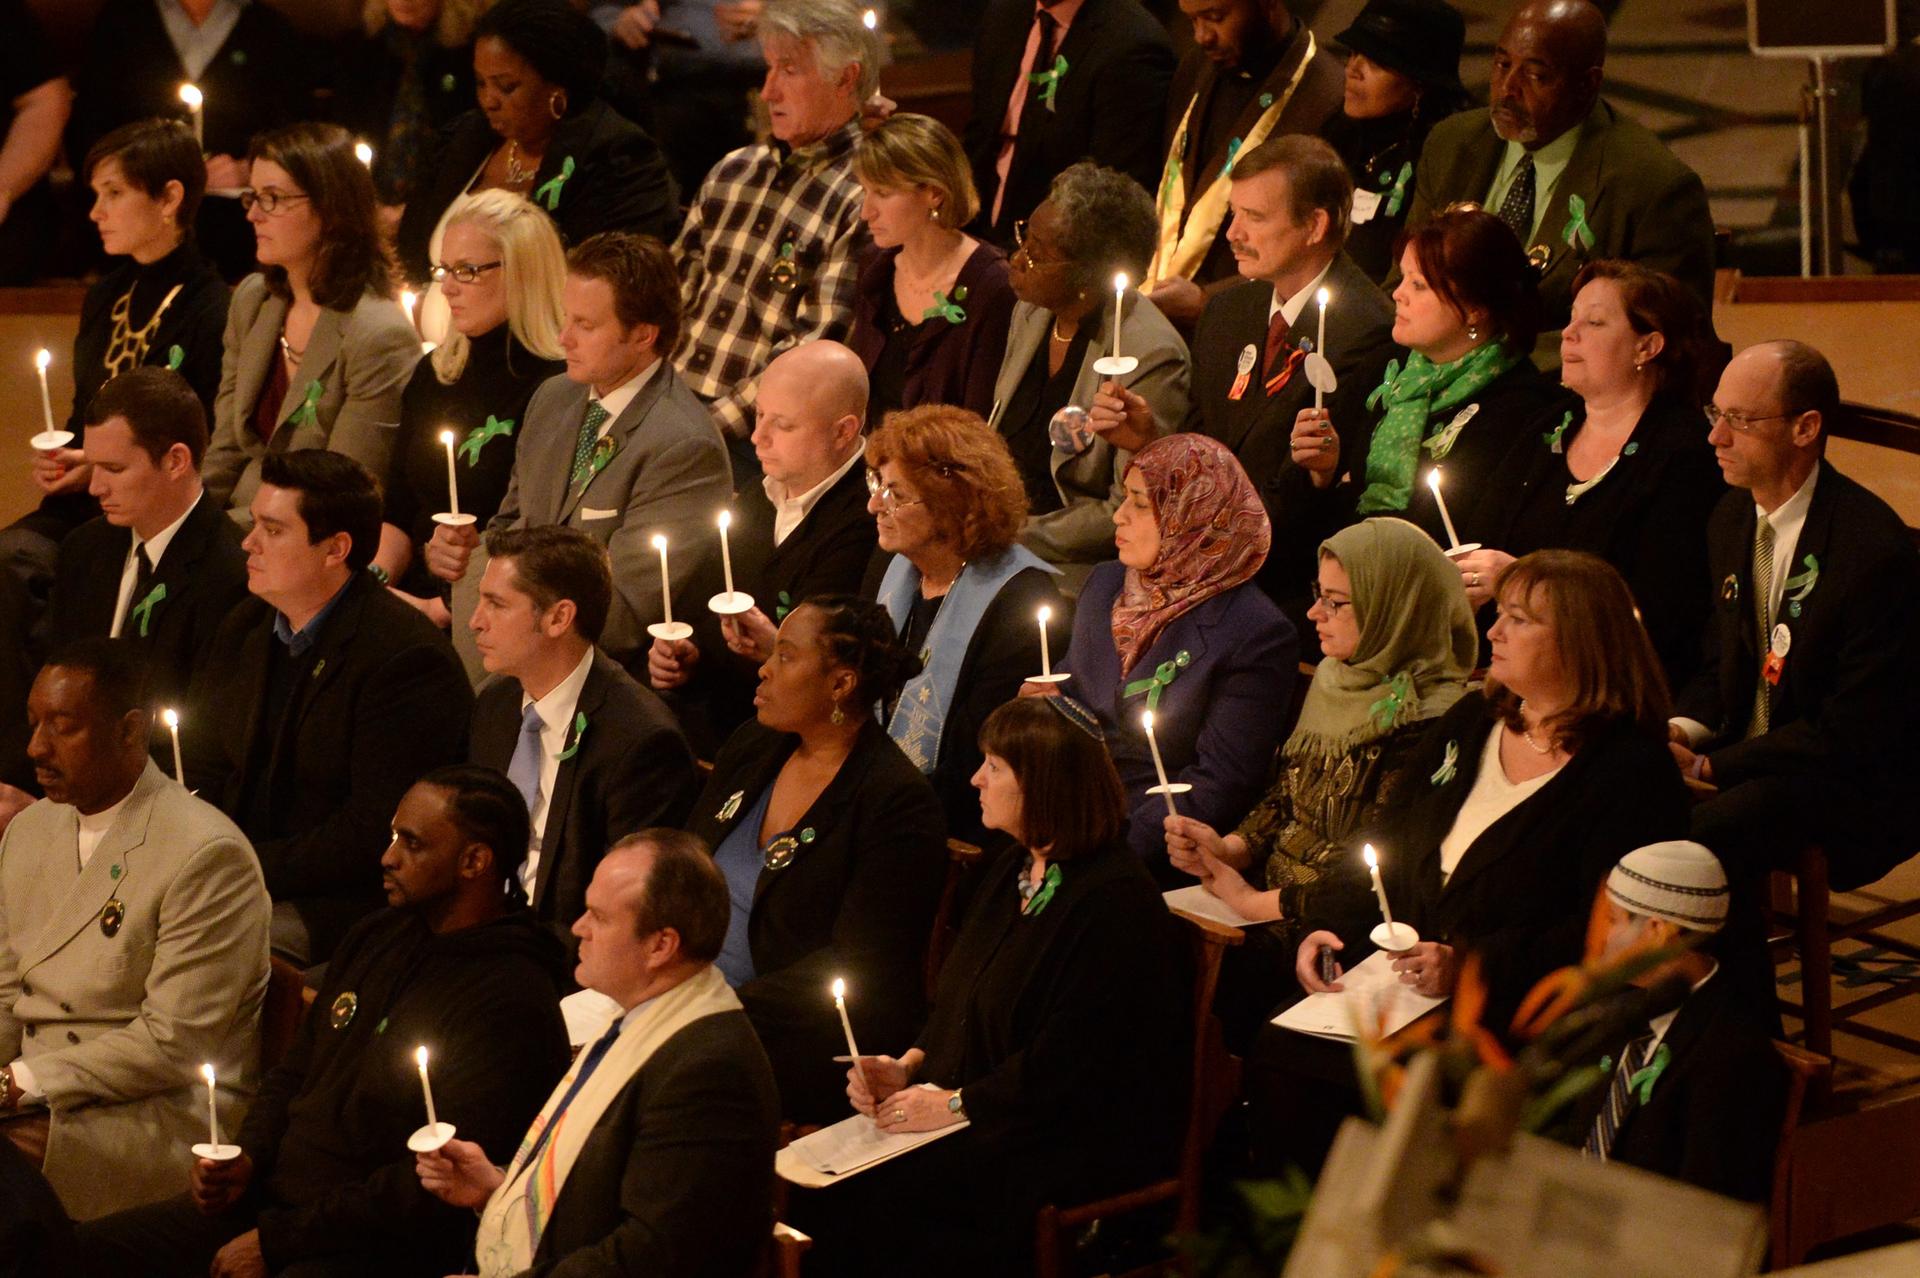 Congregation members hold lit candles during the vigil for victims of gun violence at Washington's cathedral on the eve of the anniversary of the Newtown shootings. Photo: EPA